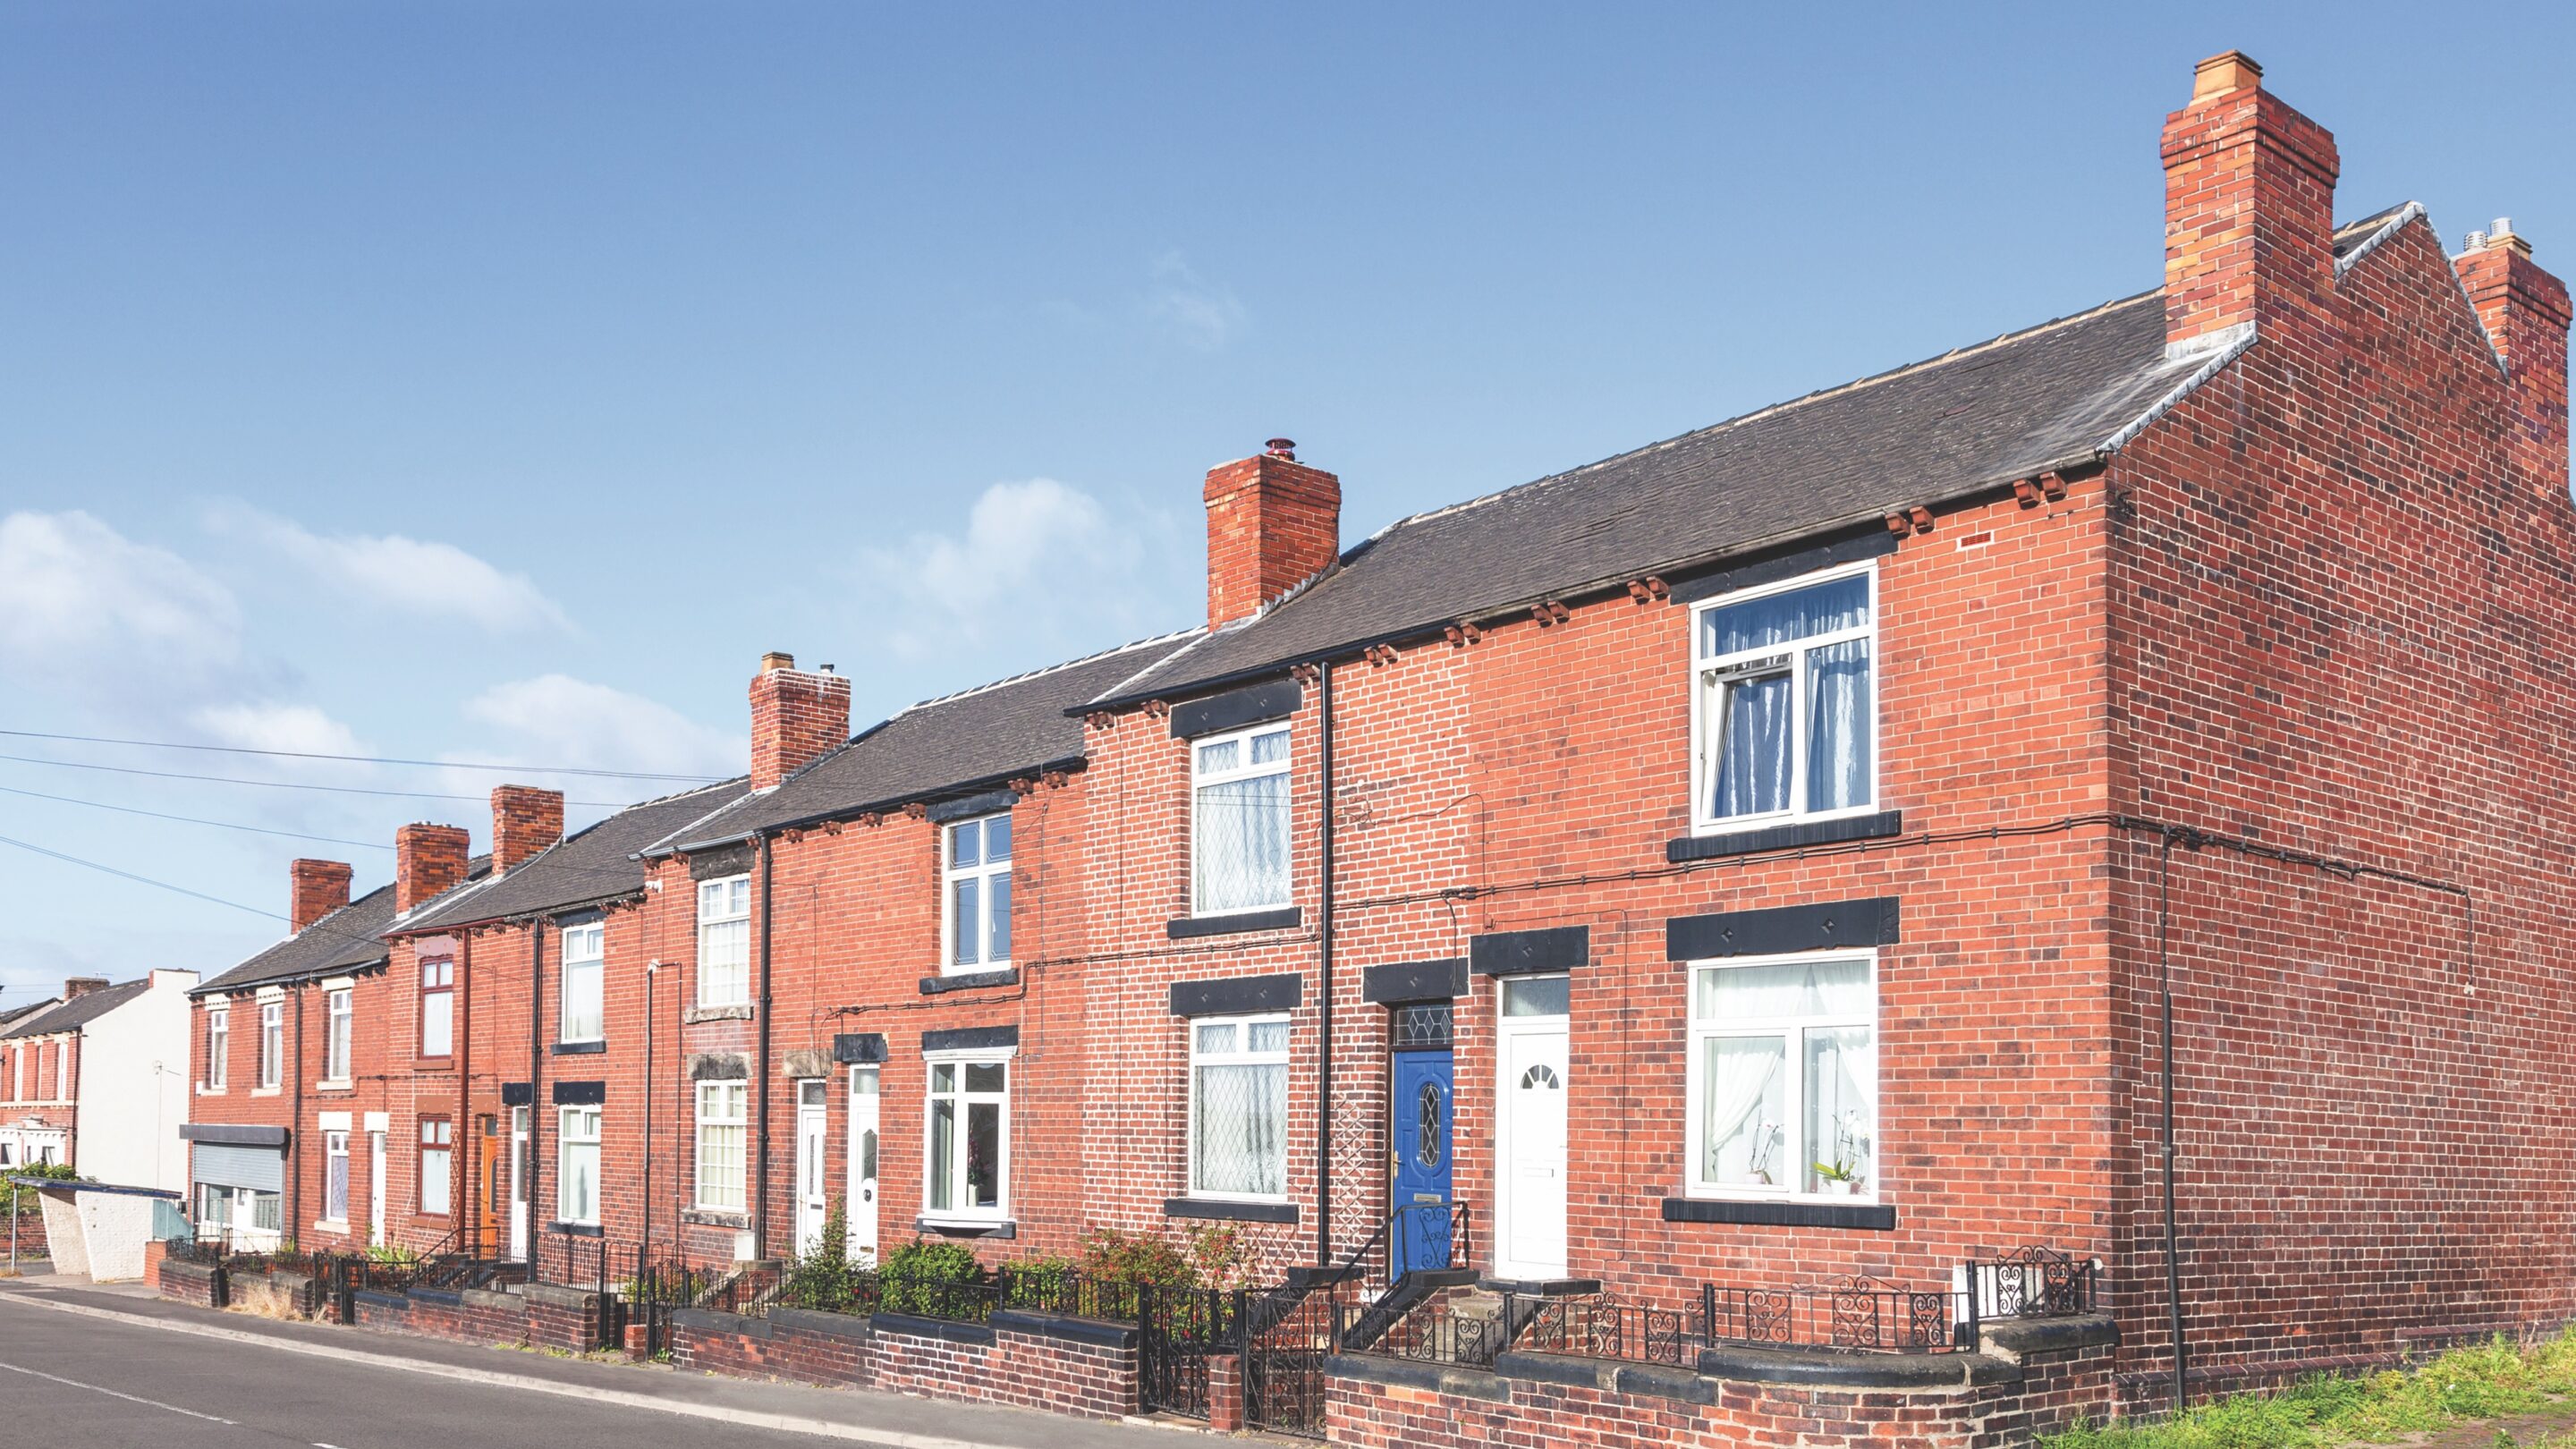 A row of brick terraced houses in the UK with a blue summer sky behind them.